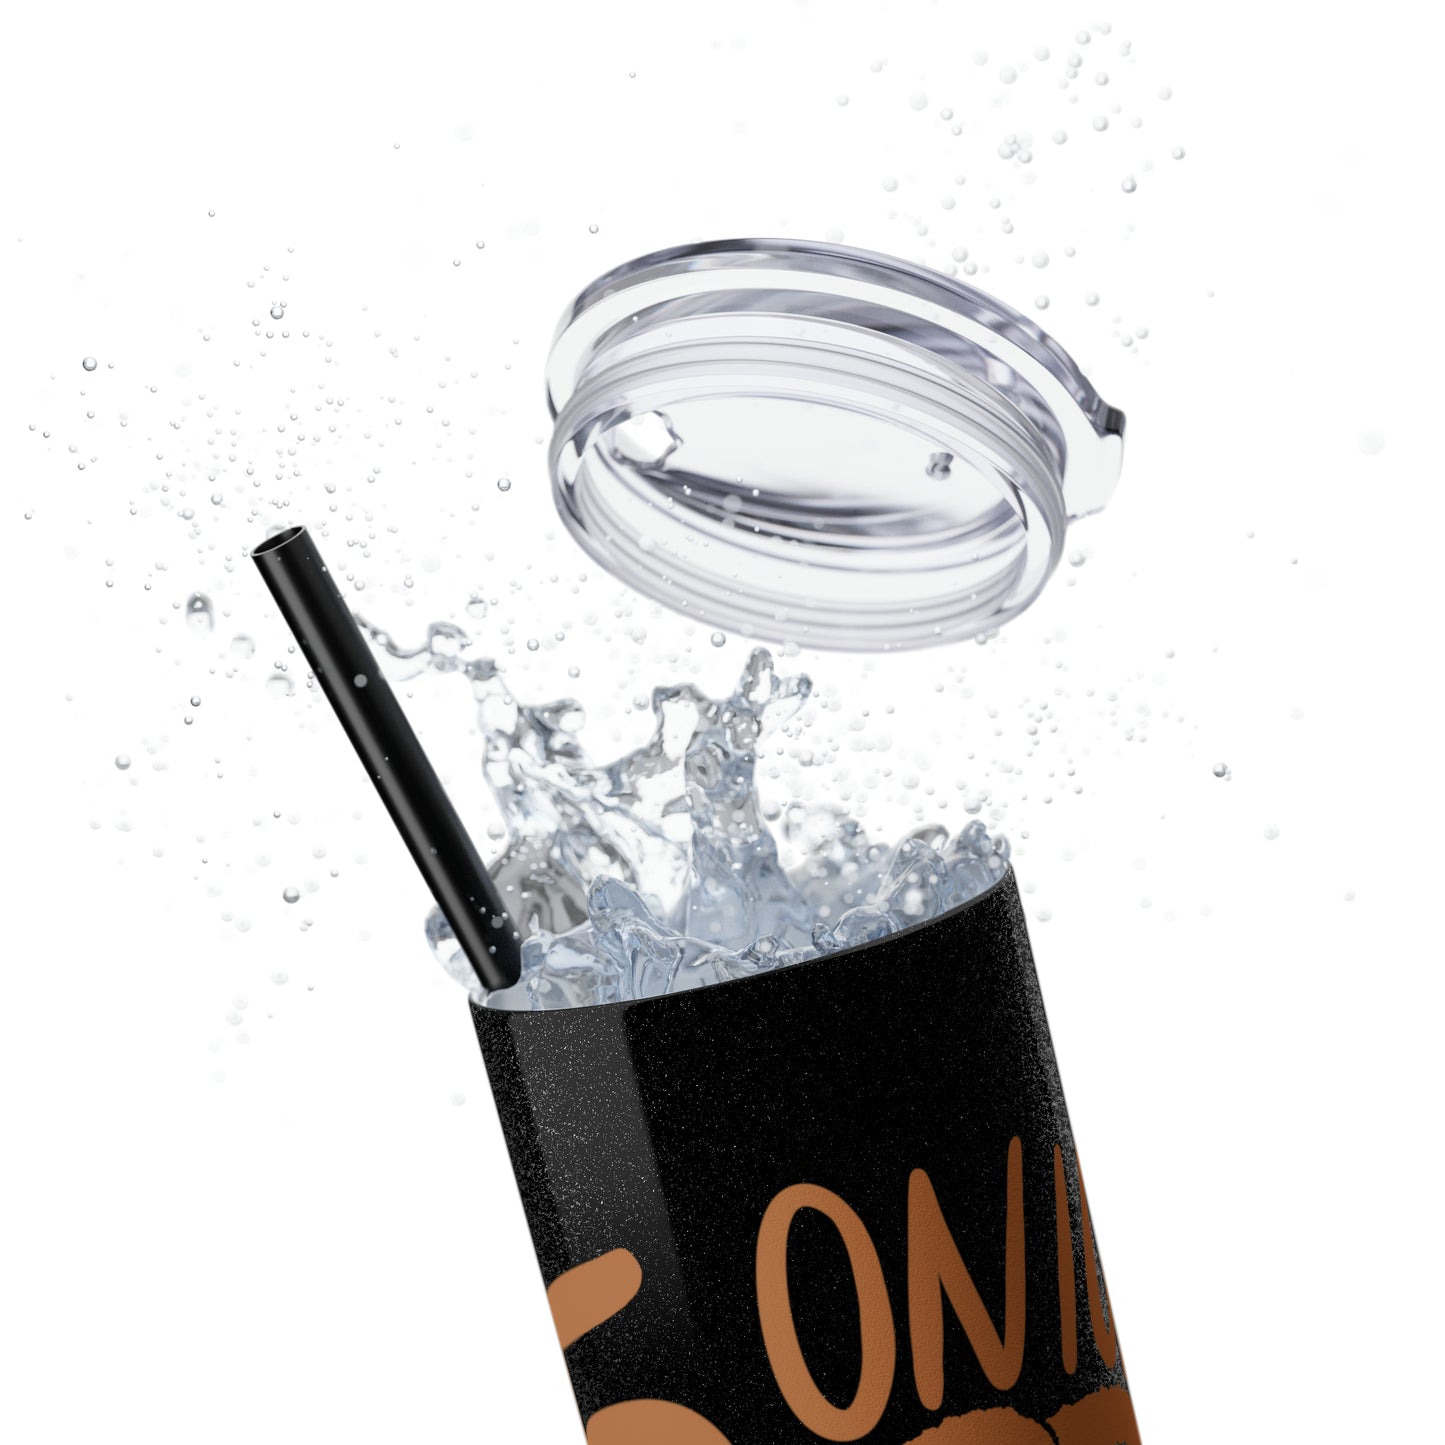 5 Onion Rings - Skinny Tumbler with Straw, 20oz